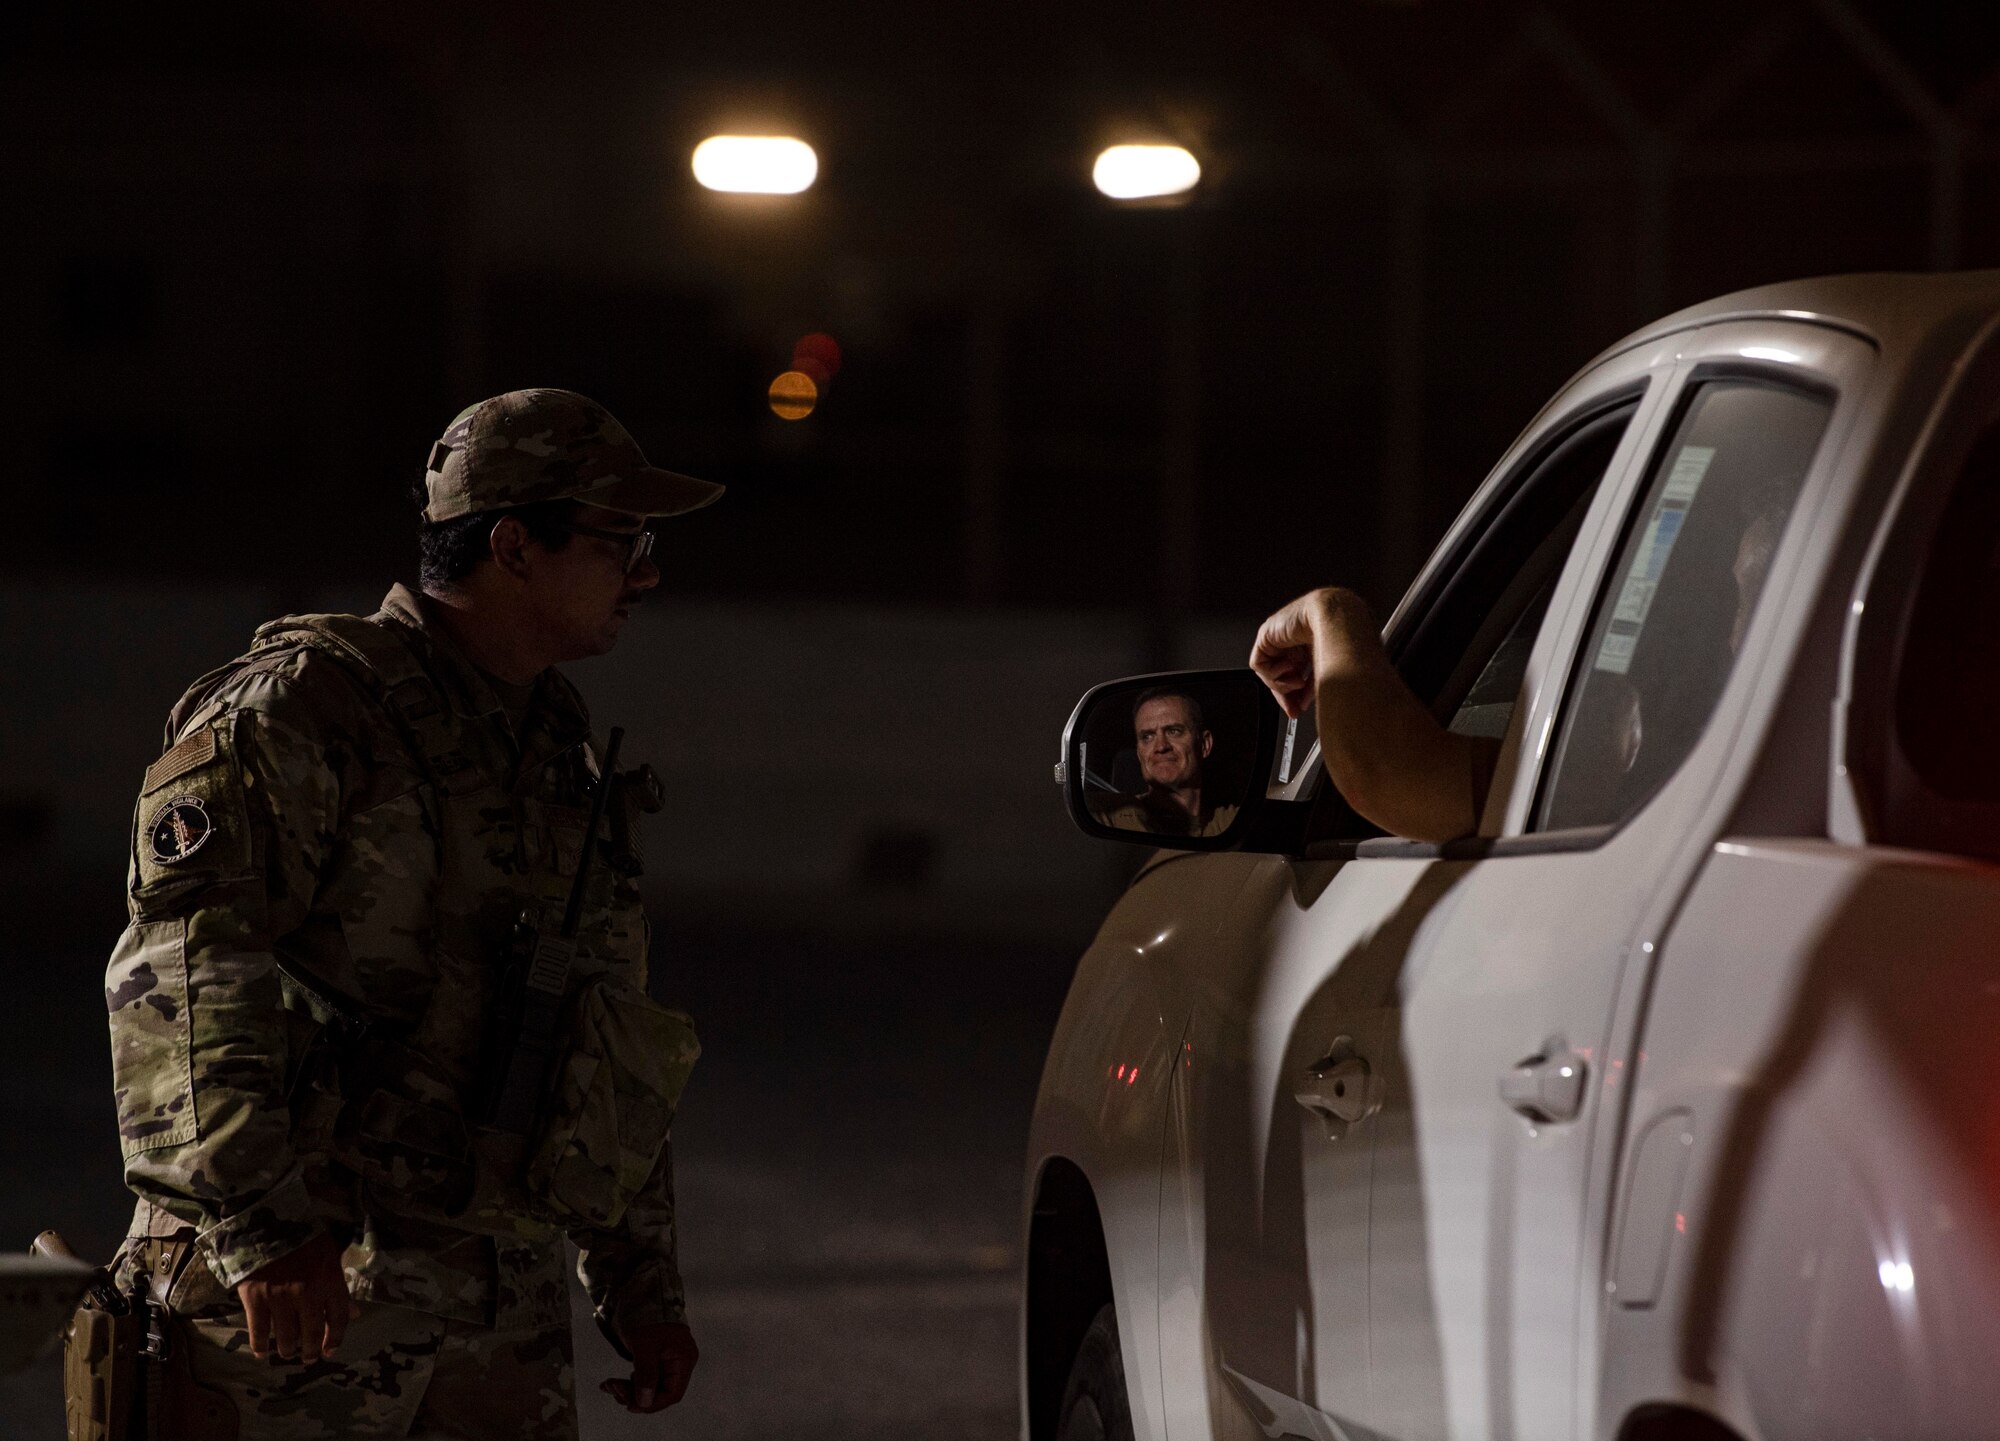 U.S. Air Force Senior Airman Sonny Perez, 379th Expeditionary Security Forces Squadron, checks identification at an entry control point July 25, 2022 at Al Udeid Air Base, Qatar. The ESFS Defenders are responsible for providing 24 hour security for the base. (U.S. Air National Guard photo by Master Sgt. Michael J. Kelly)